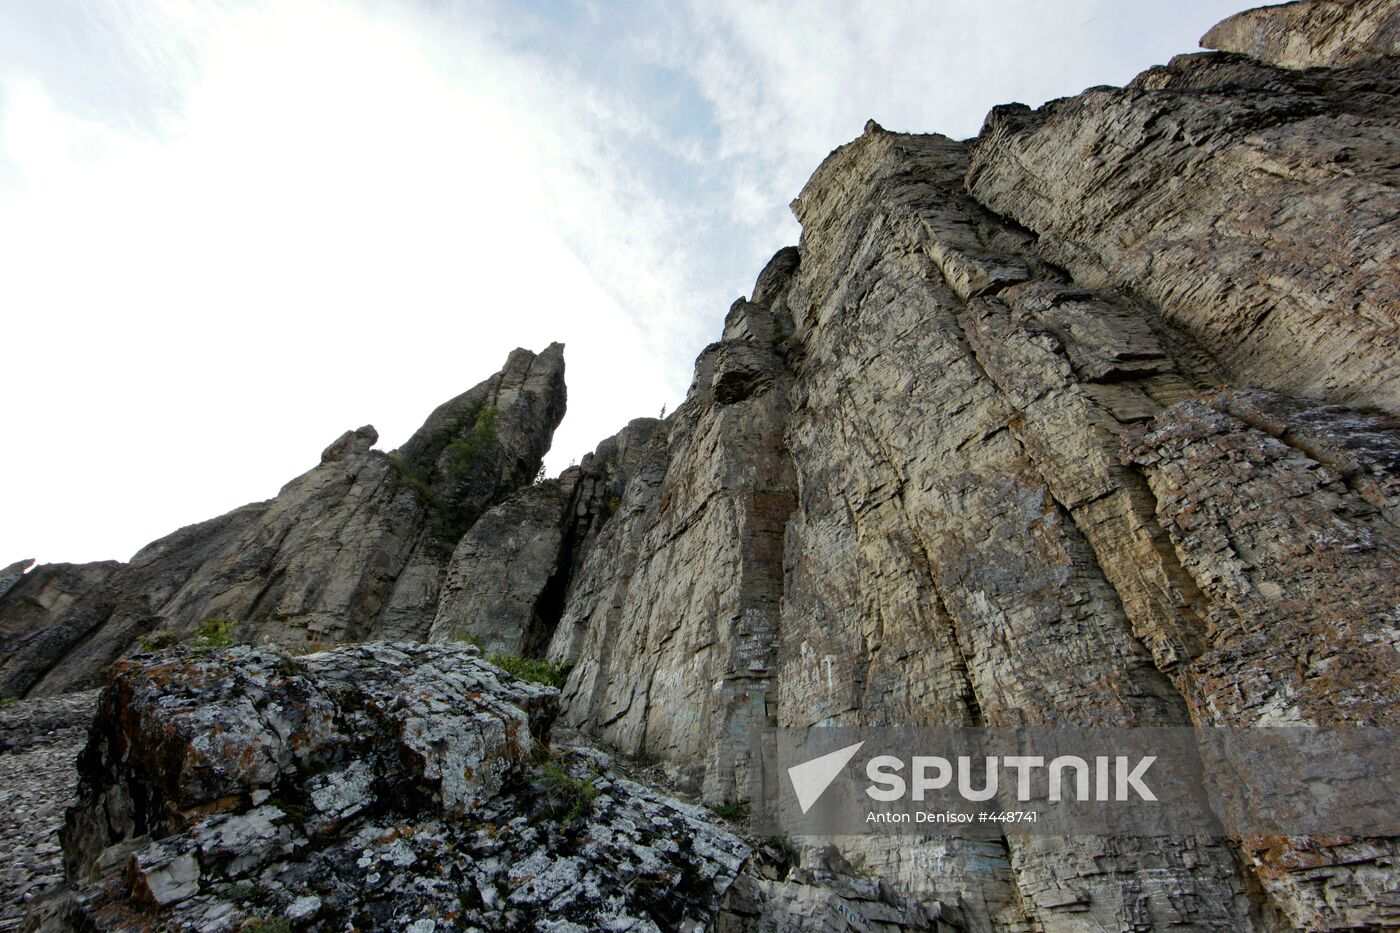 The Lenskie Stolby Nature Park in Yakutia